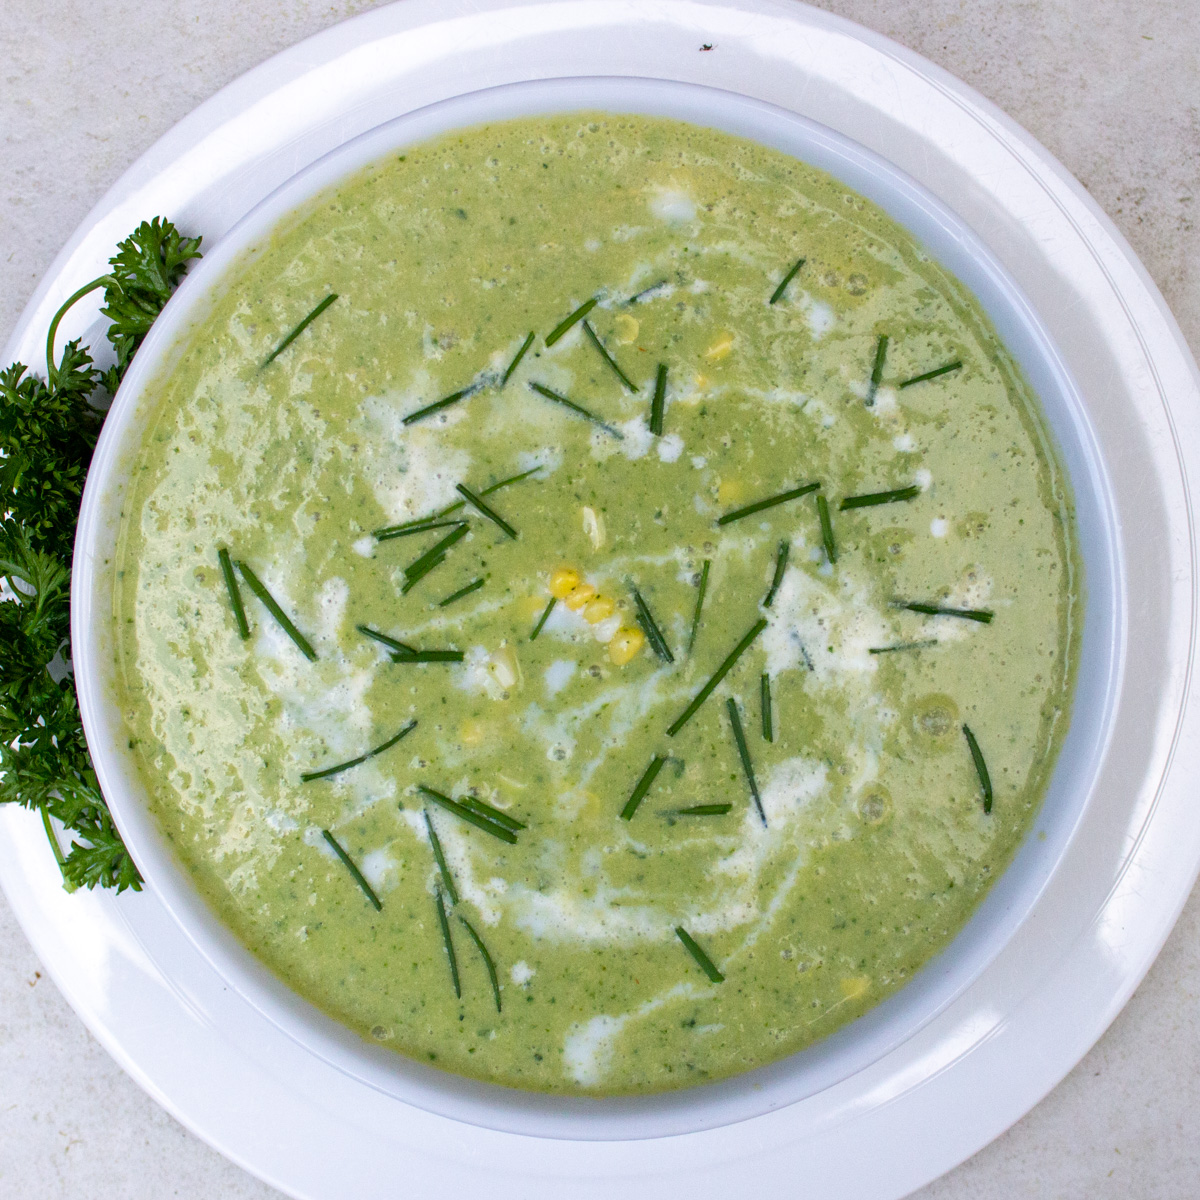 bowl of sweet corn soup with herbs, garnished.